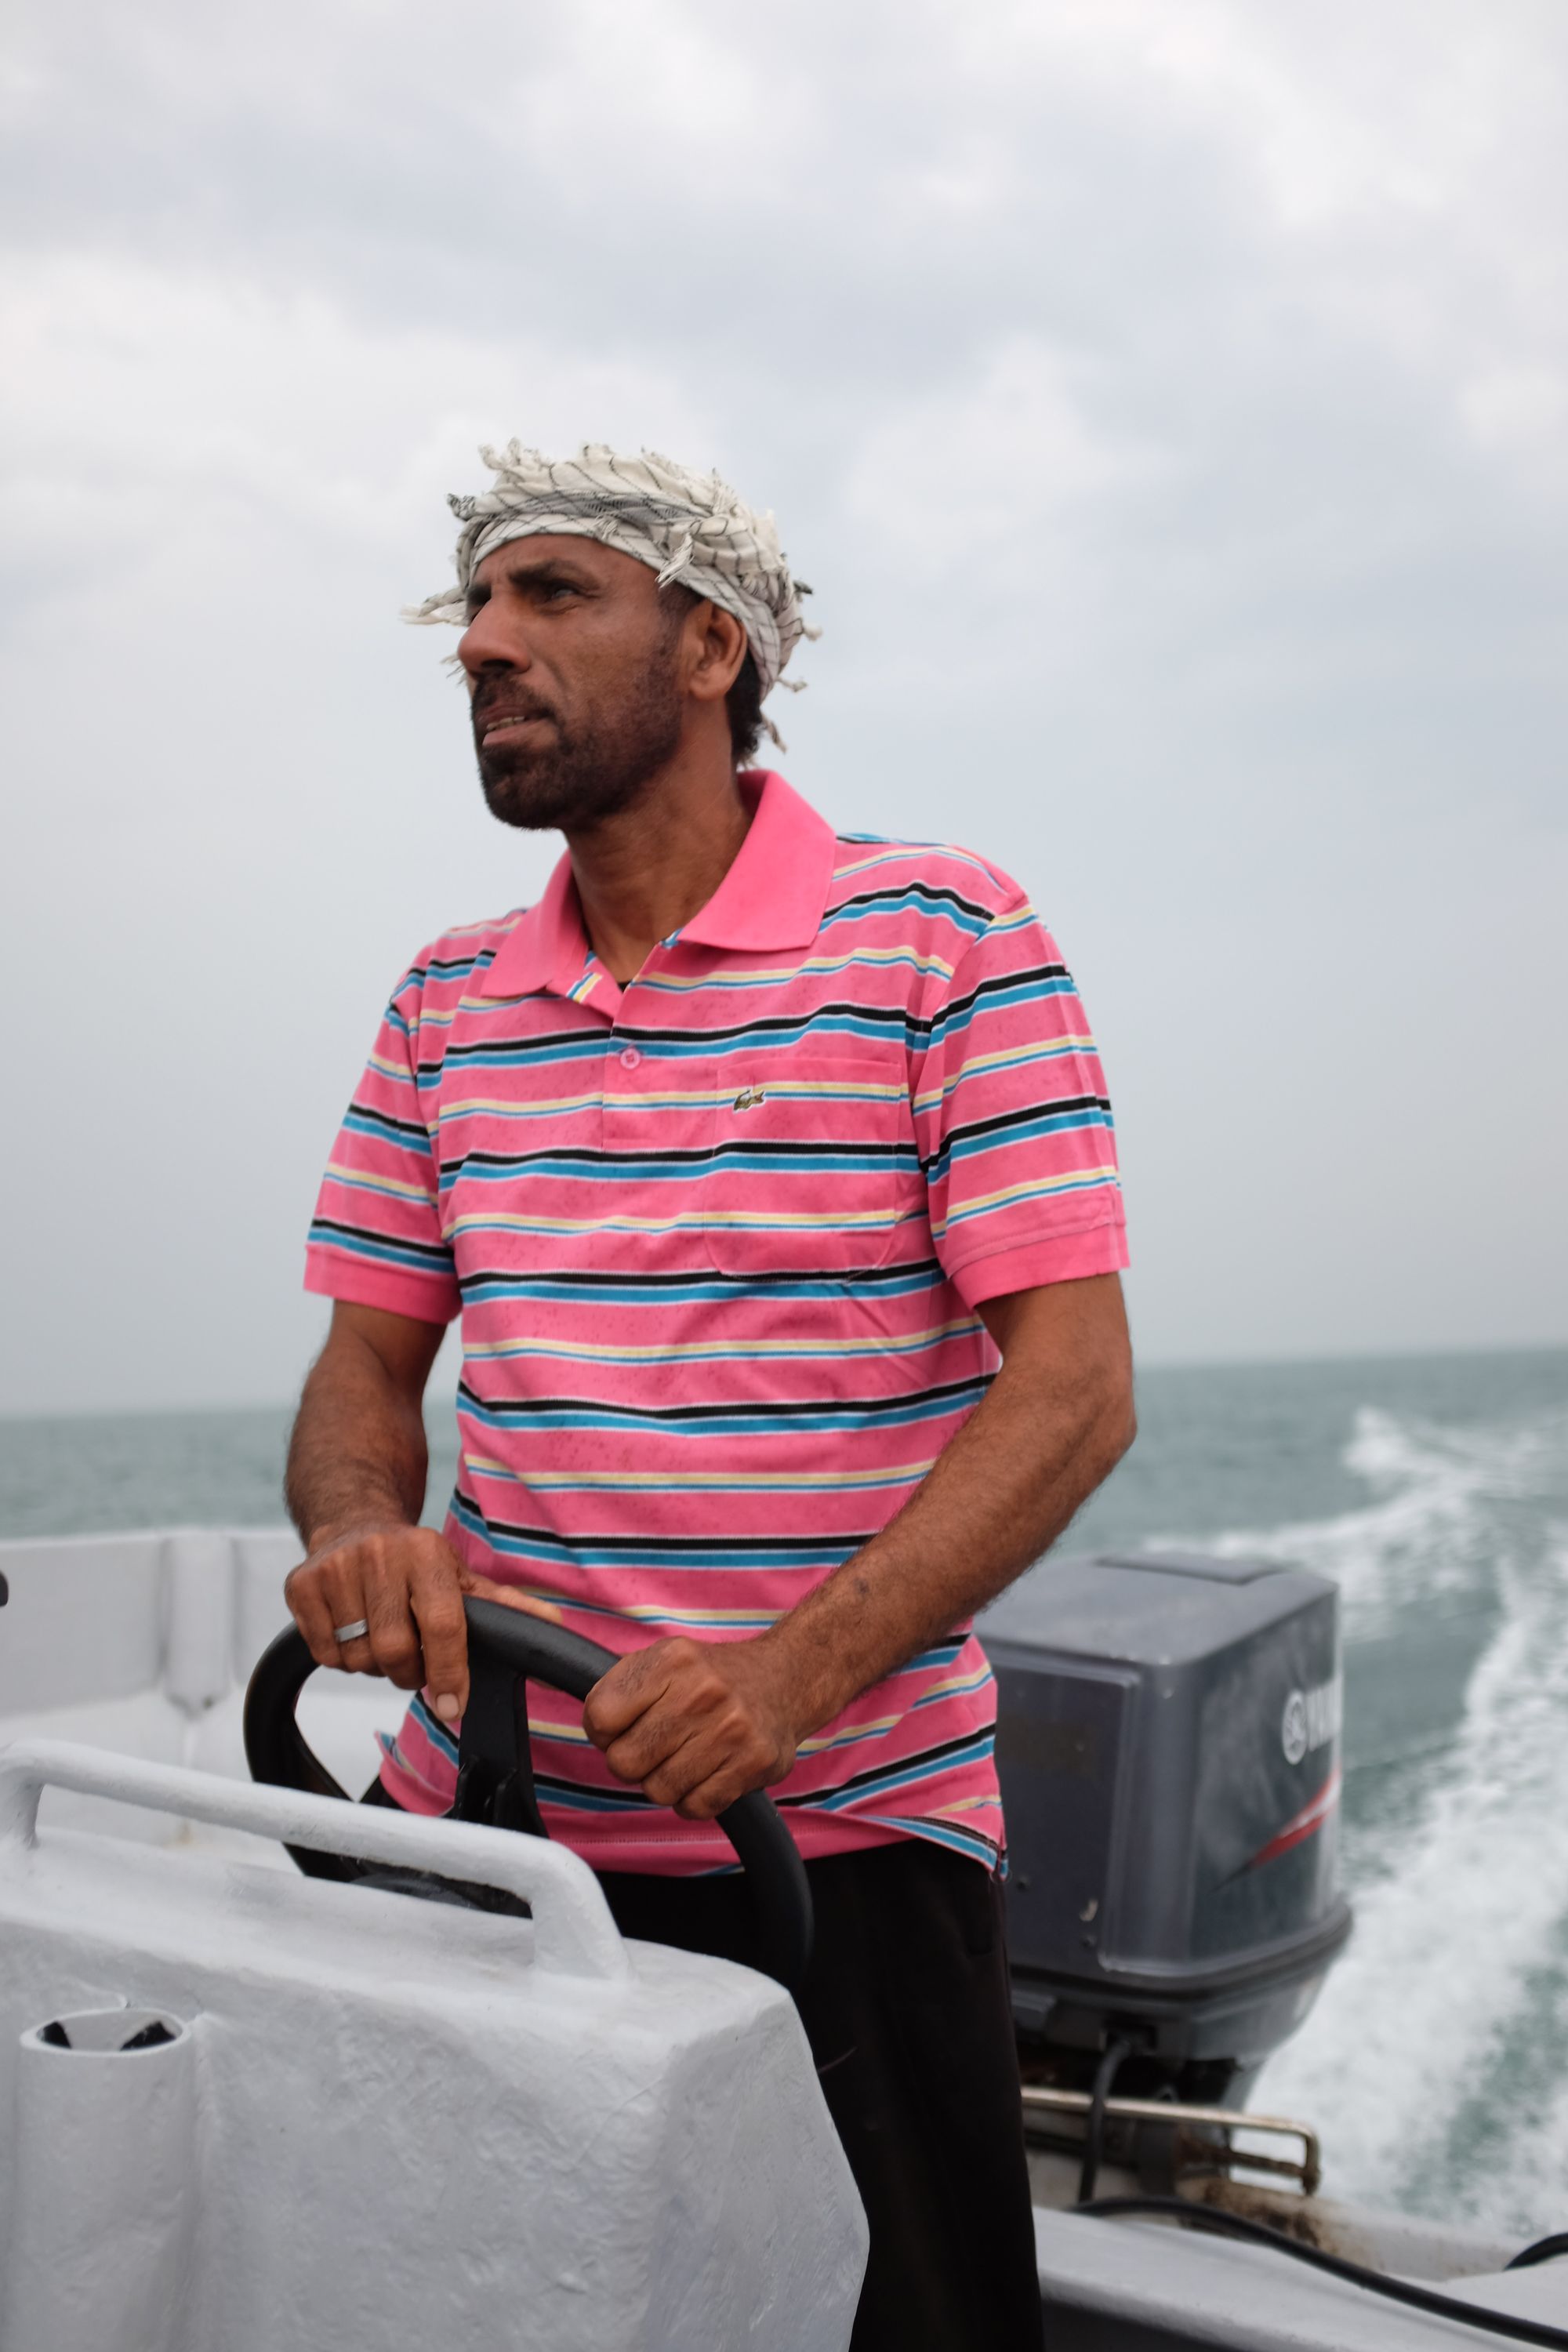 A man in a pink striped polo shirt with a scarf wrapped around his head drives a powerboat under a cloudy sky.